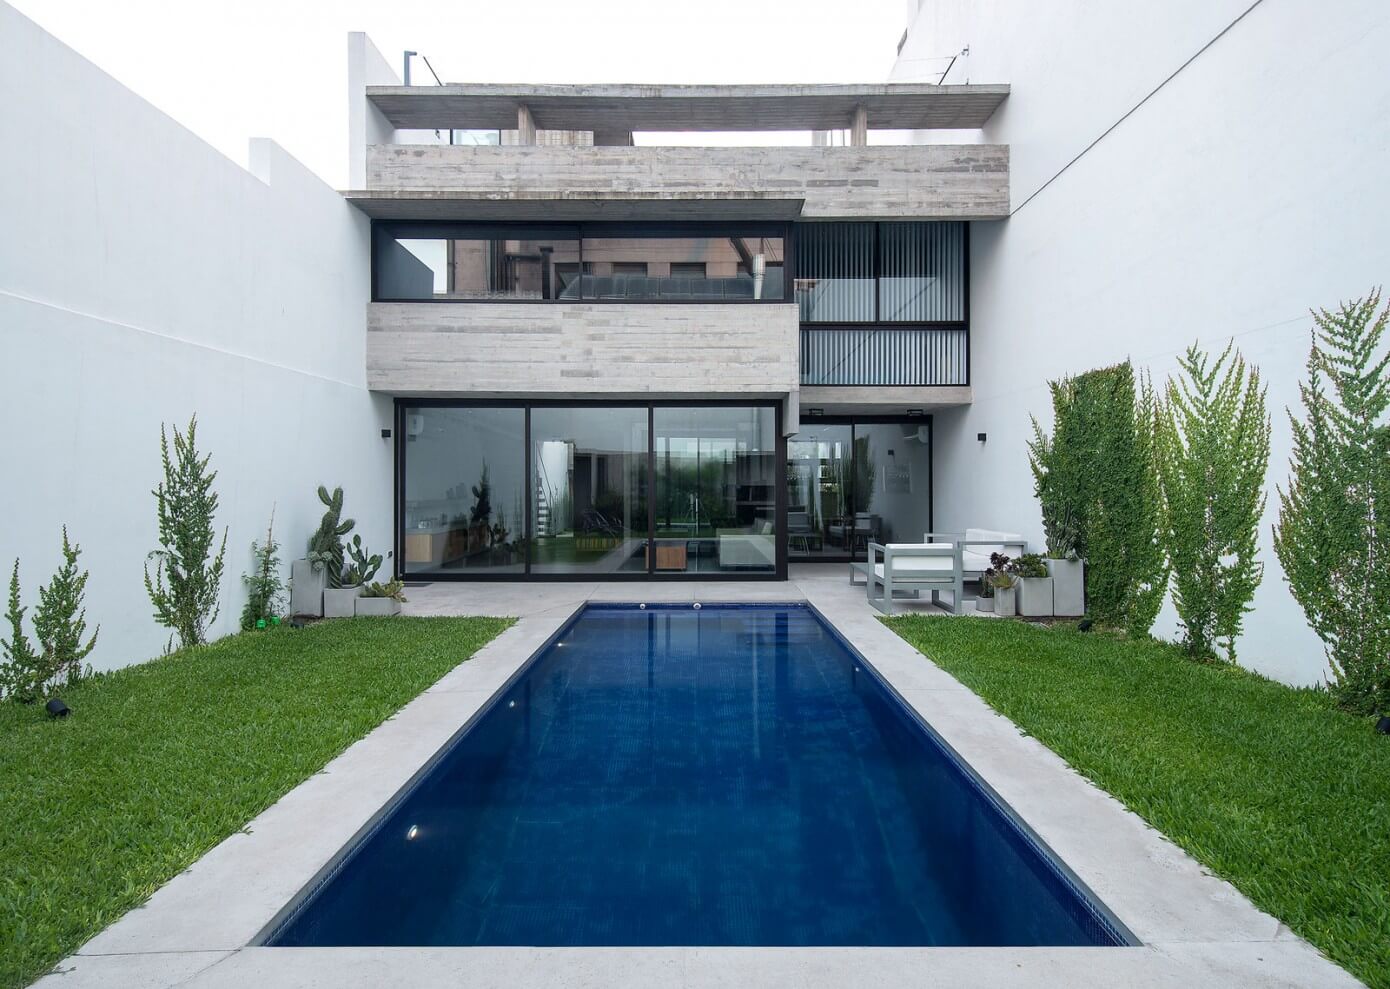 Two Houses by BAK Arquitectos